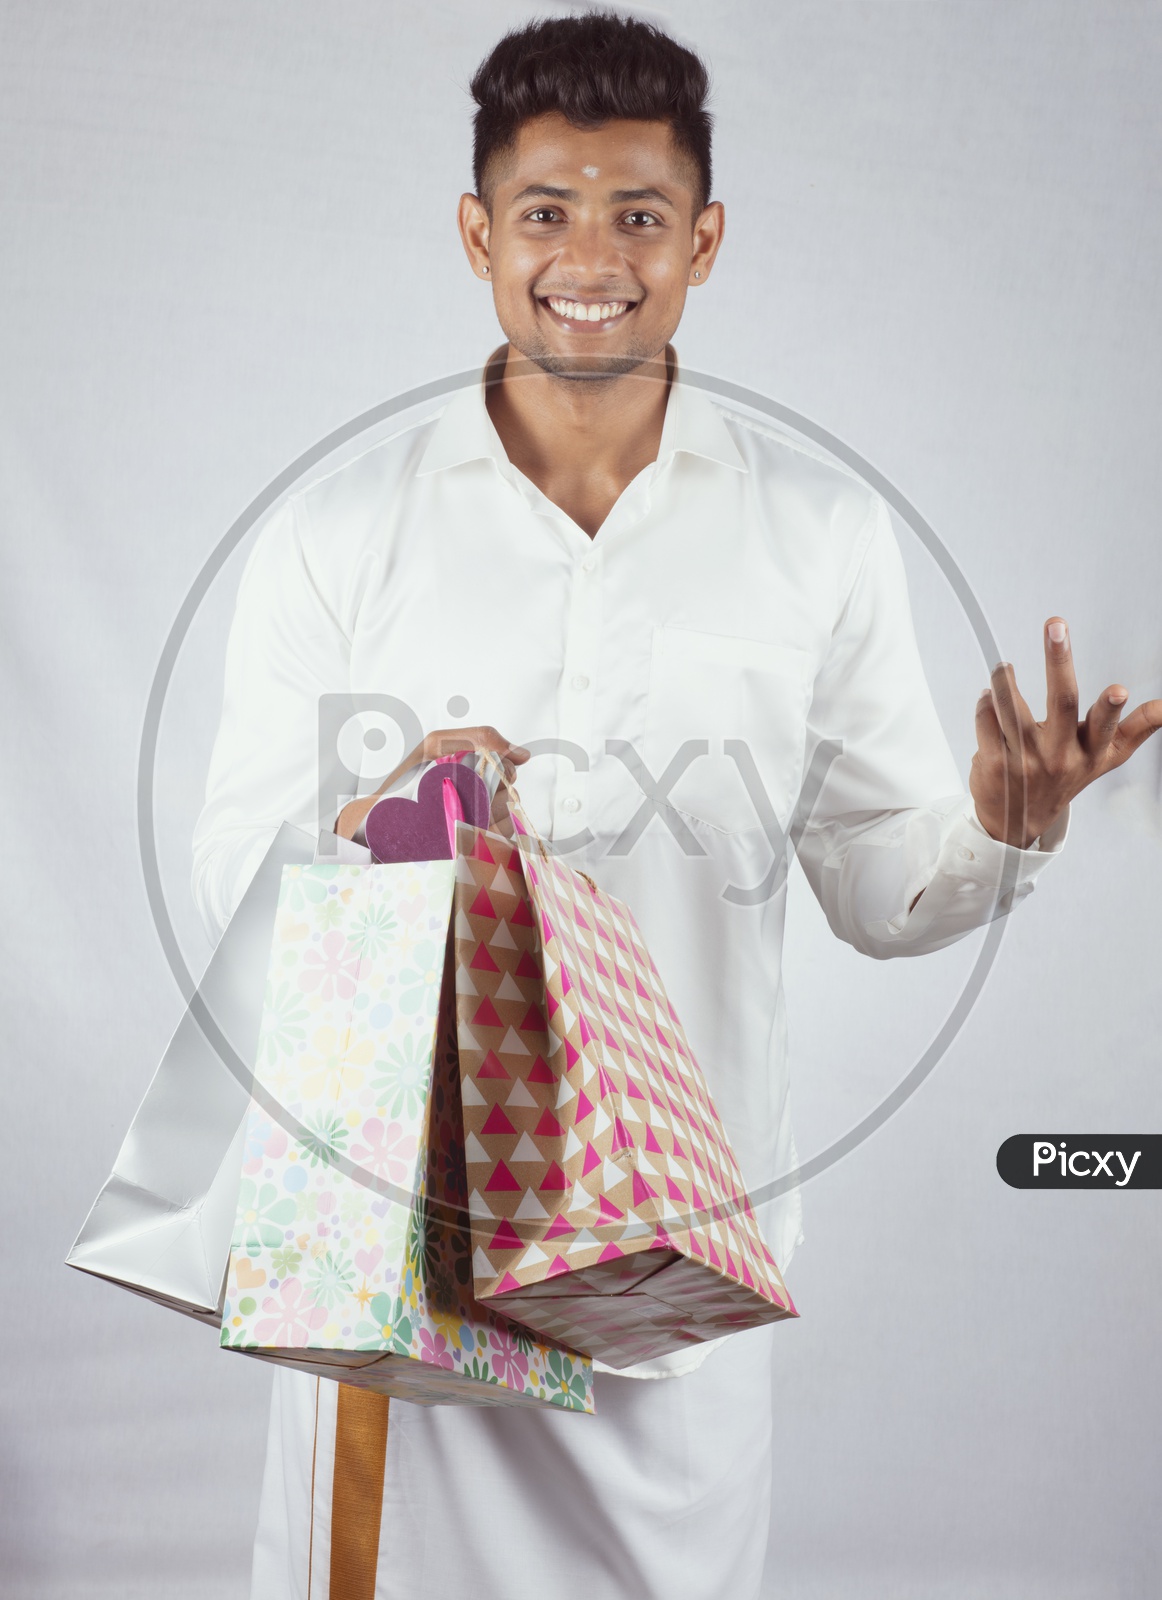 An Indian Male Model In traditional South Indian Attire with Shopping Bags in One Hand and with Smiling Face with expression  on an Isolated White Background